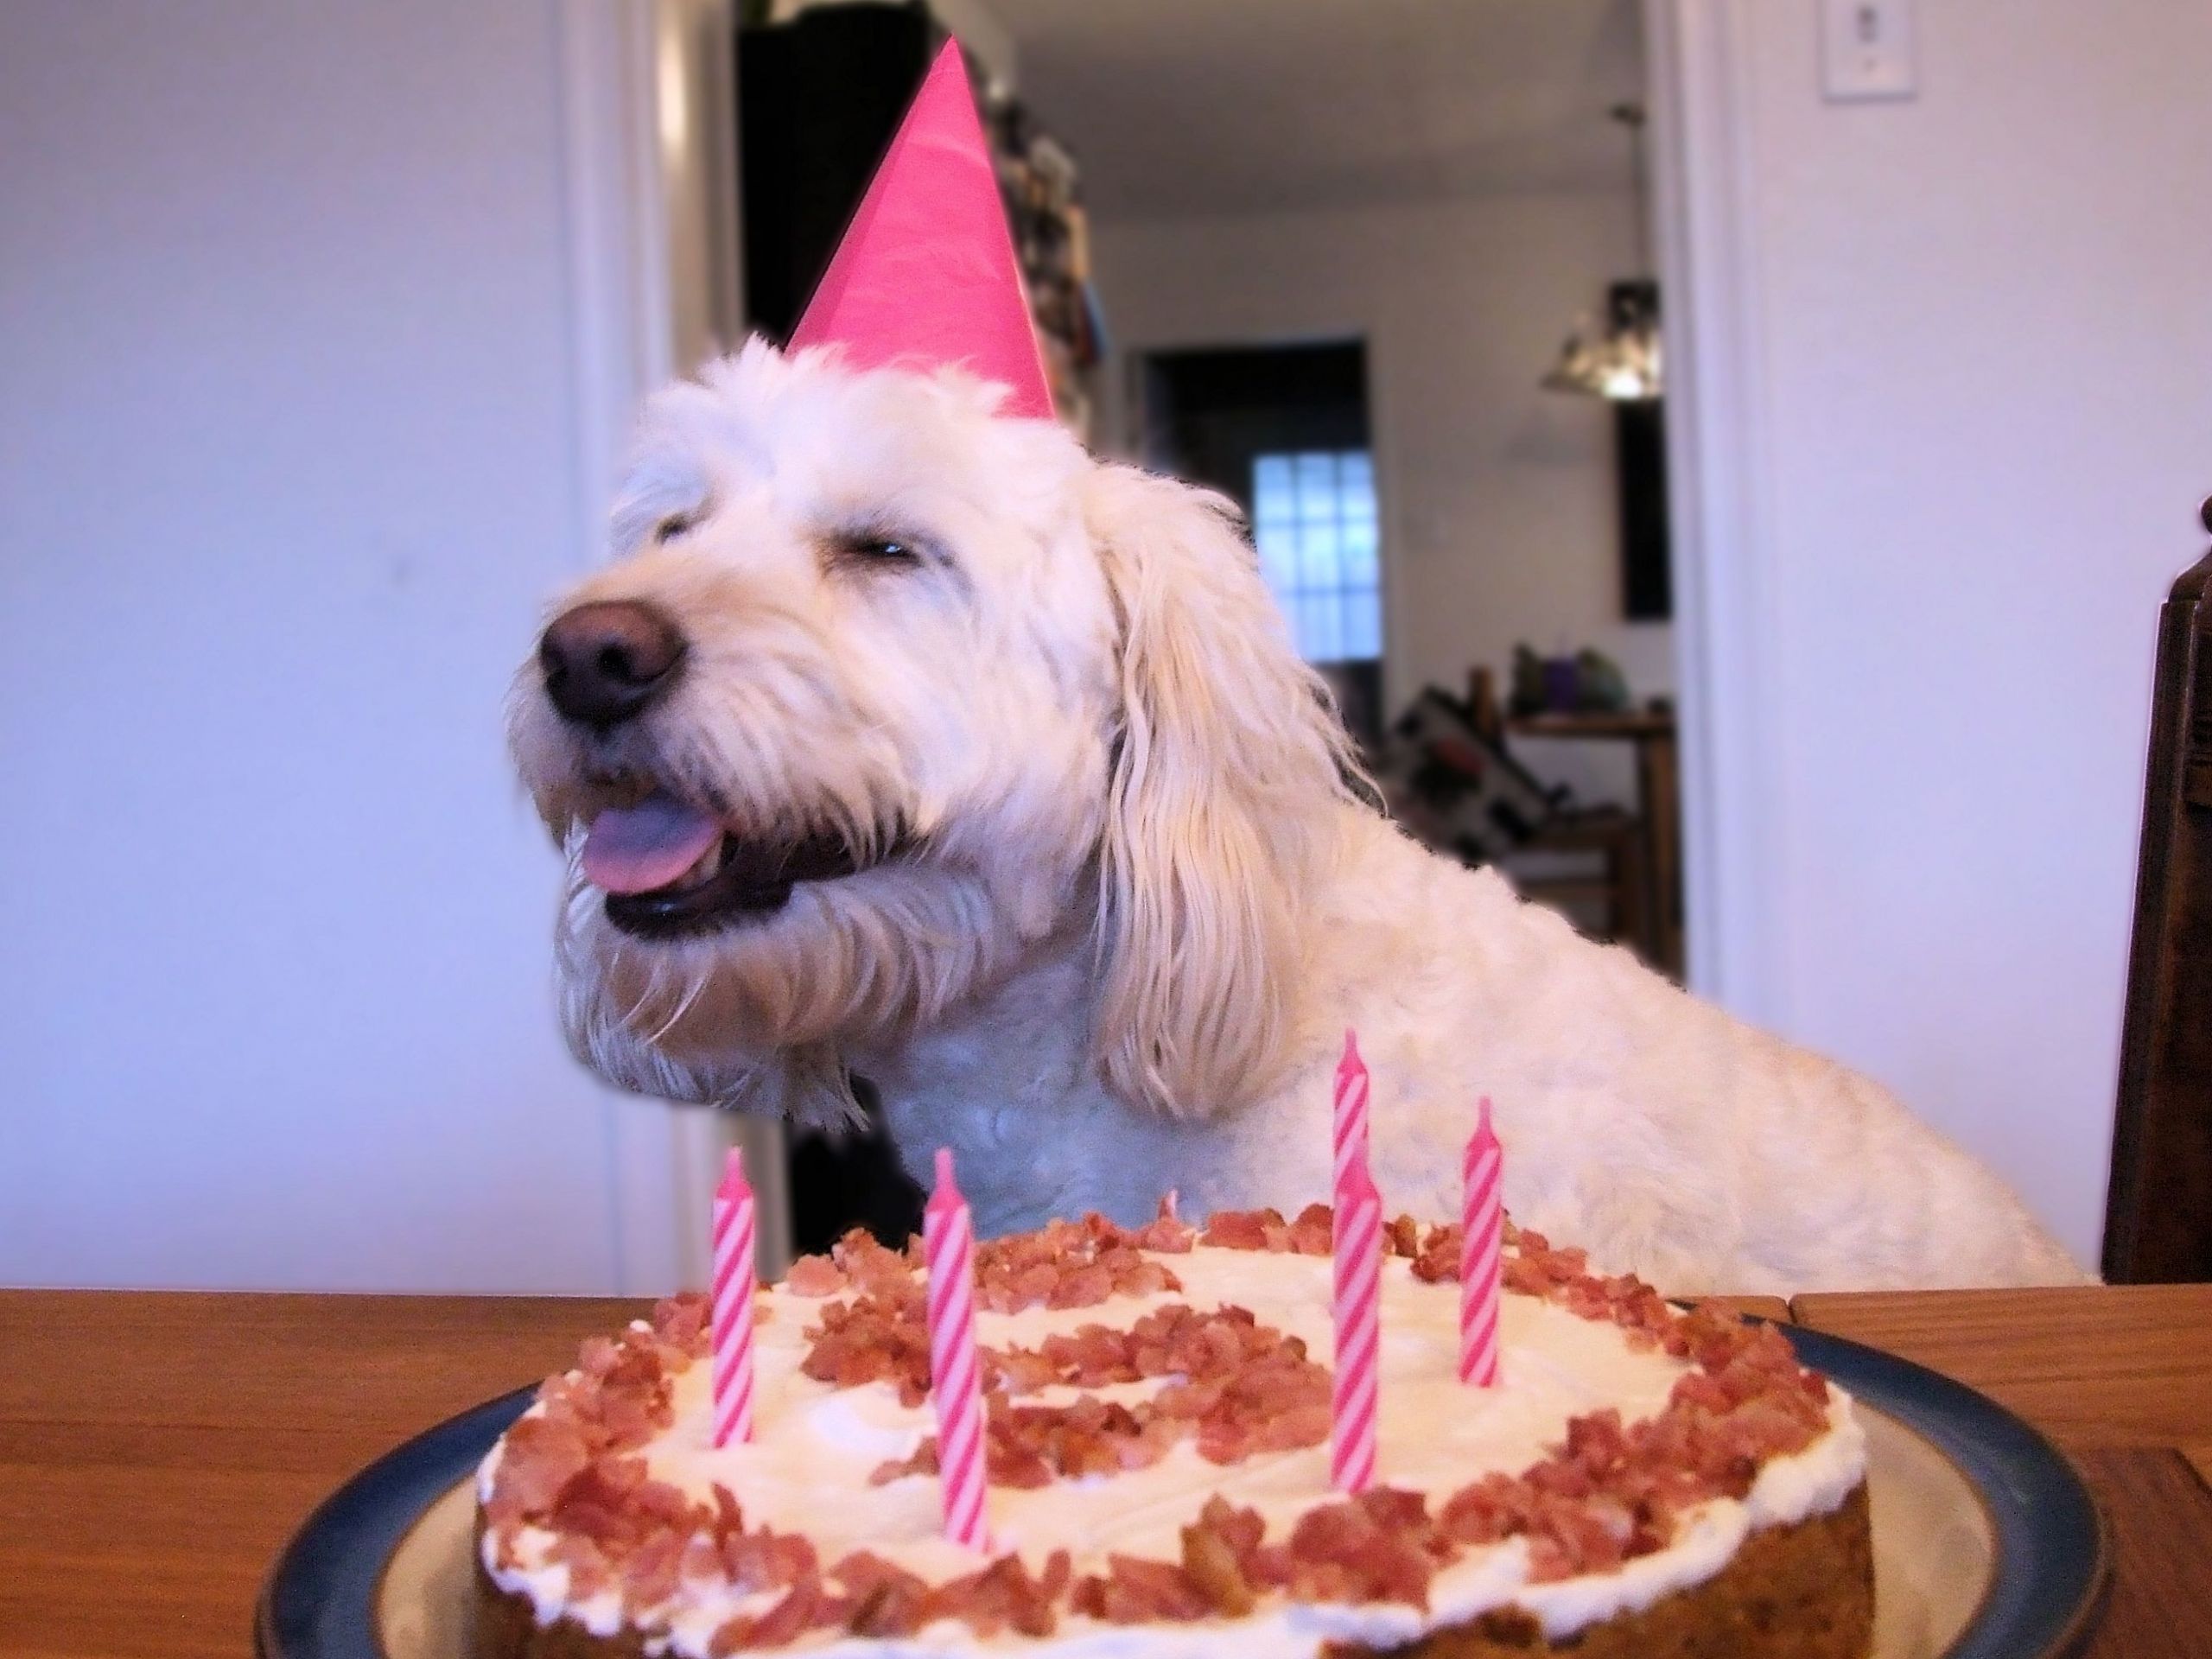 Birthday Cake For Dog
 This is my friend s dog just as she was about to receive